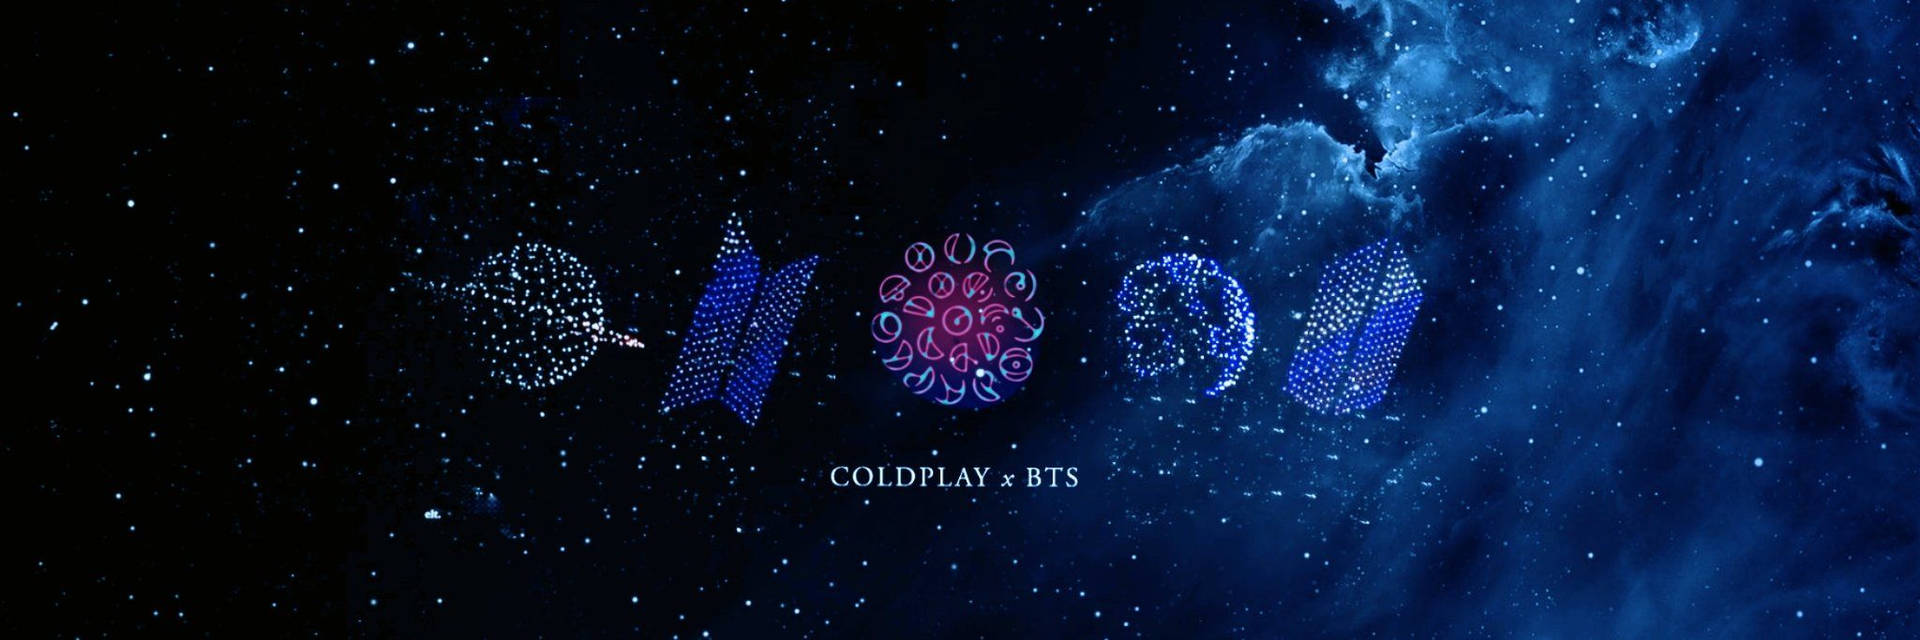 Coldplay And Bts With Stars Twitter Header Picture